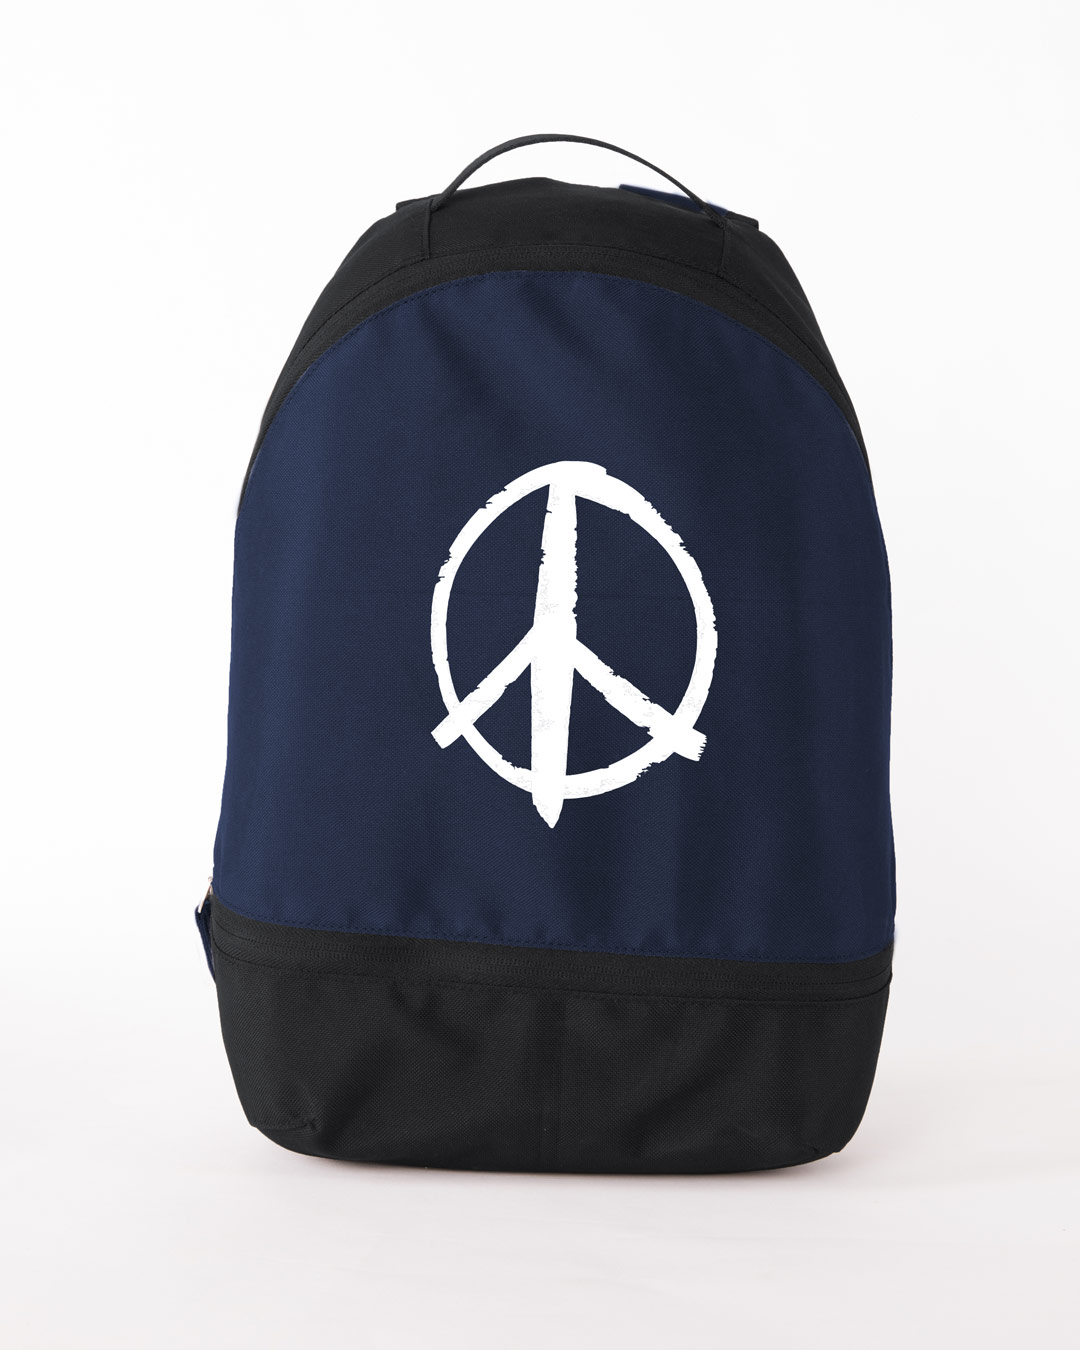 PEACE IN UKRAINE SOLIDARY TOTE BAG – LASER BARCELONA